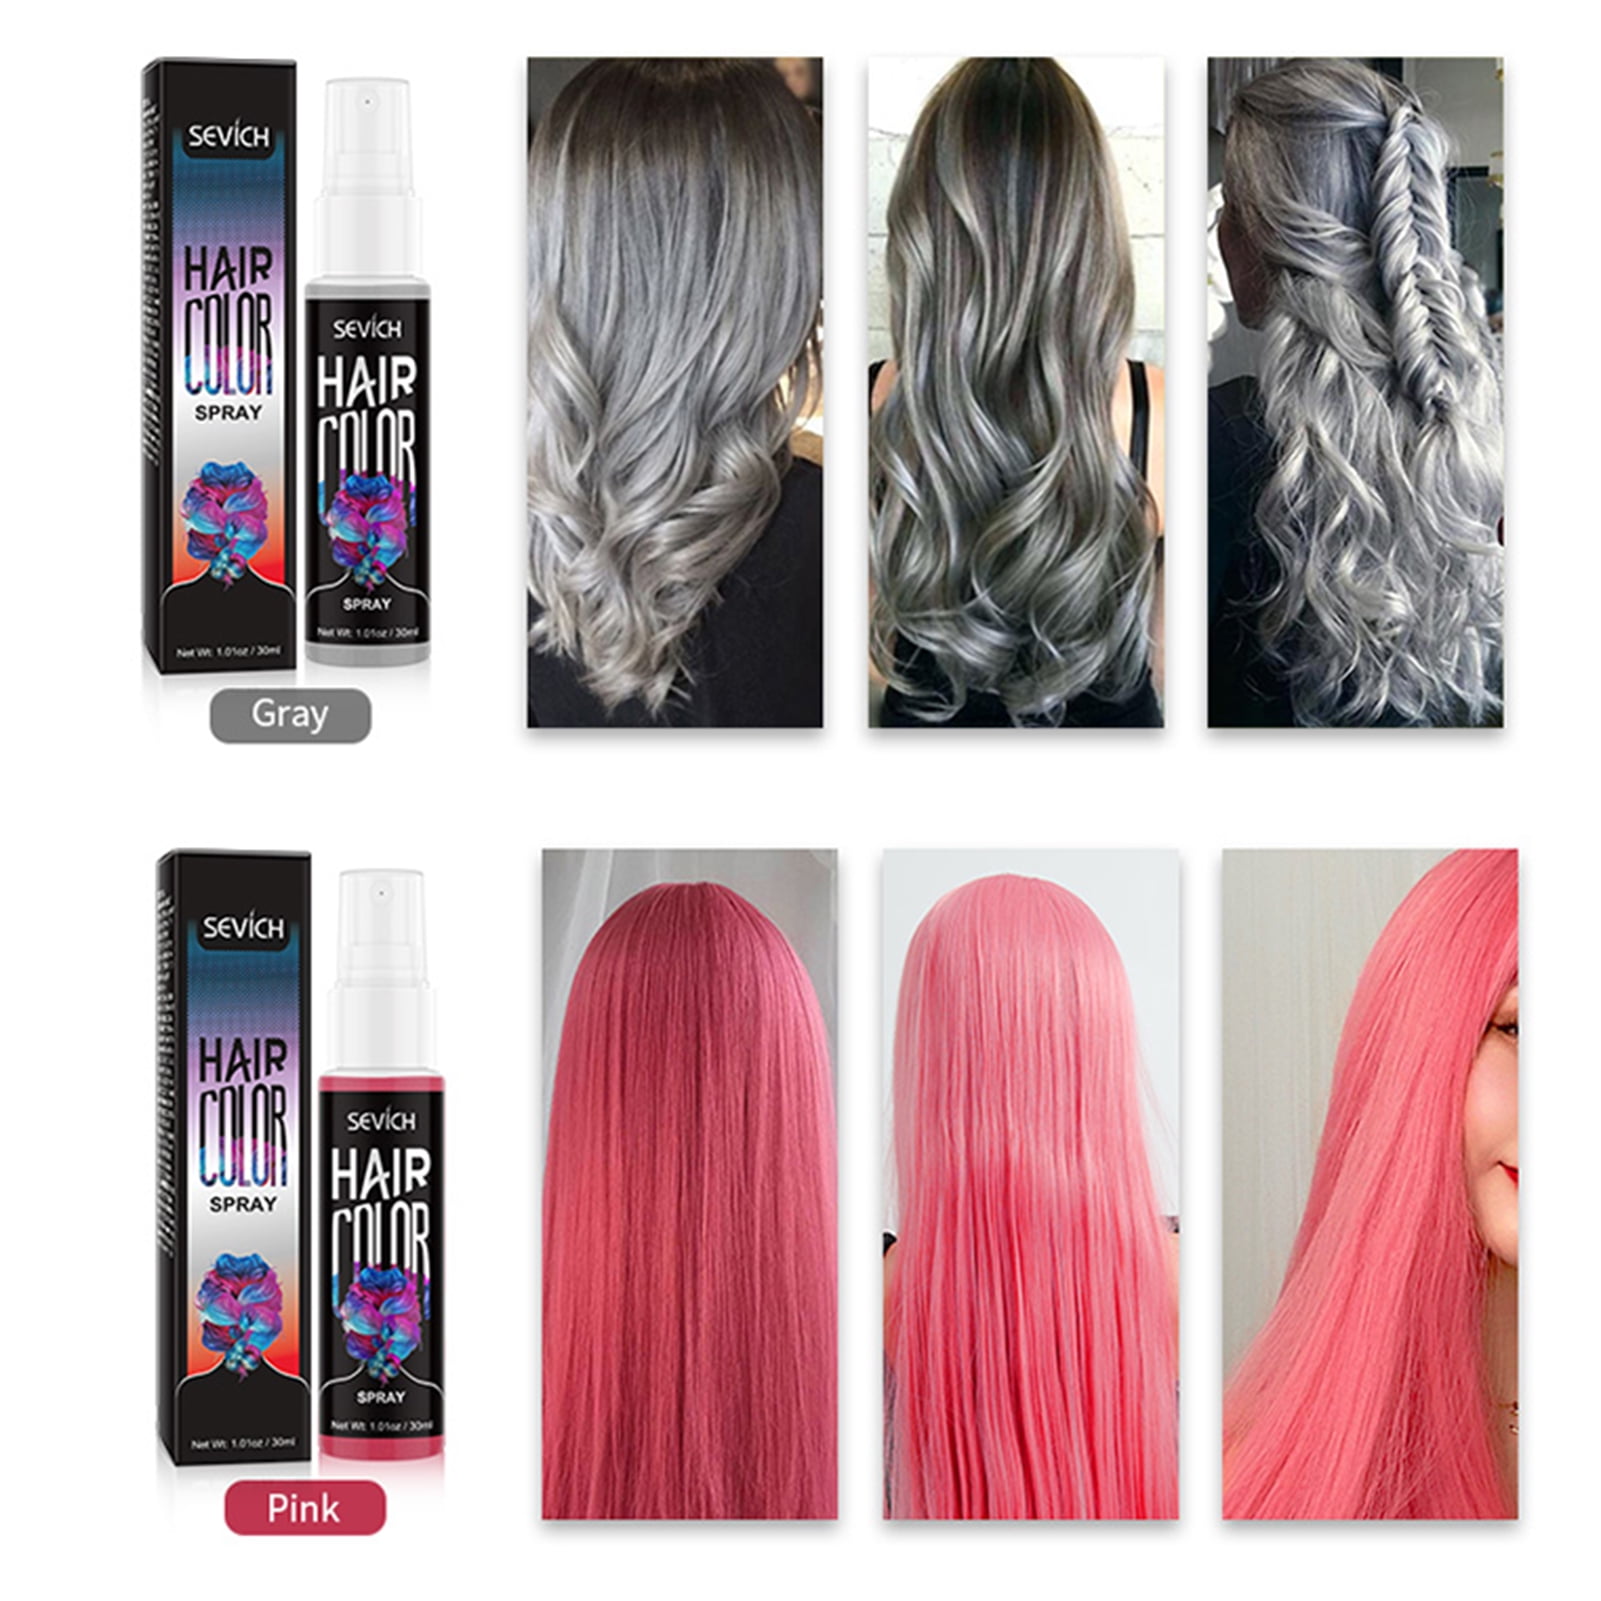 Hair Chalk Pinkiou Temporary Bright Hair Color Dye for Girls Kids, Washable  Hair Chalk Set/Kit for Girls New Year Birthday Party Cosplay DIY - 8